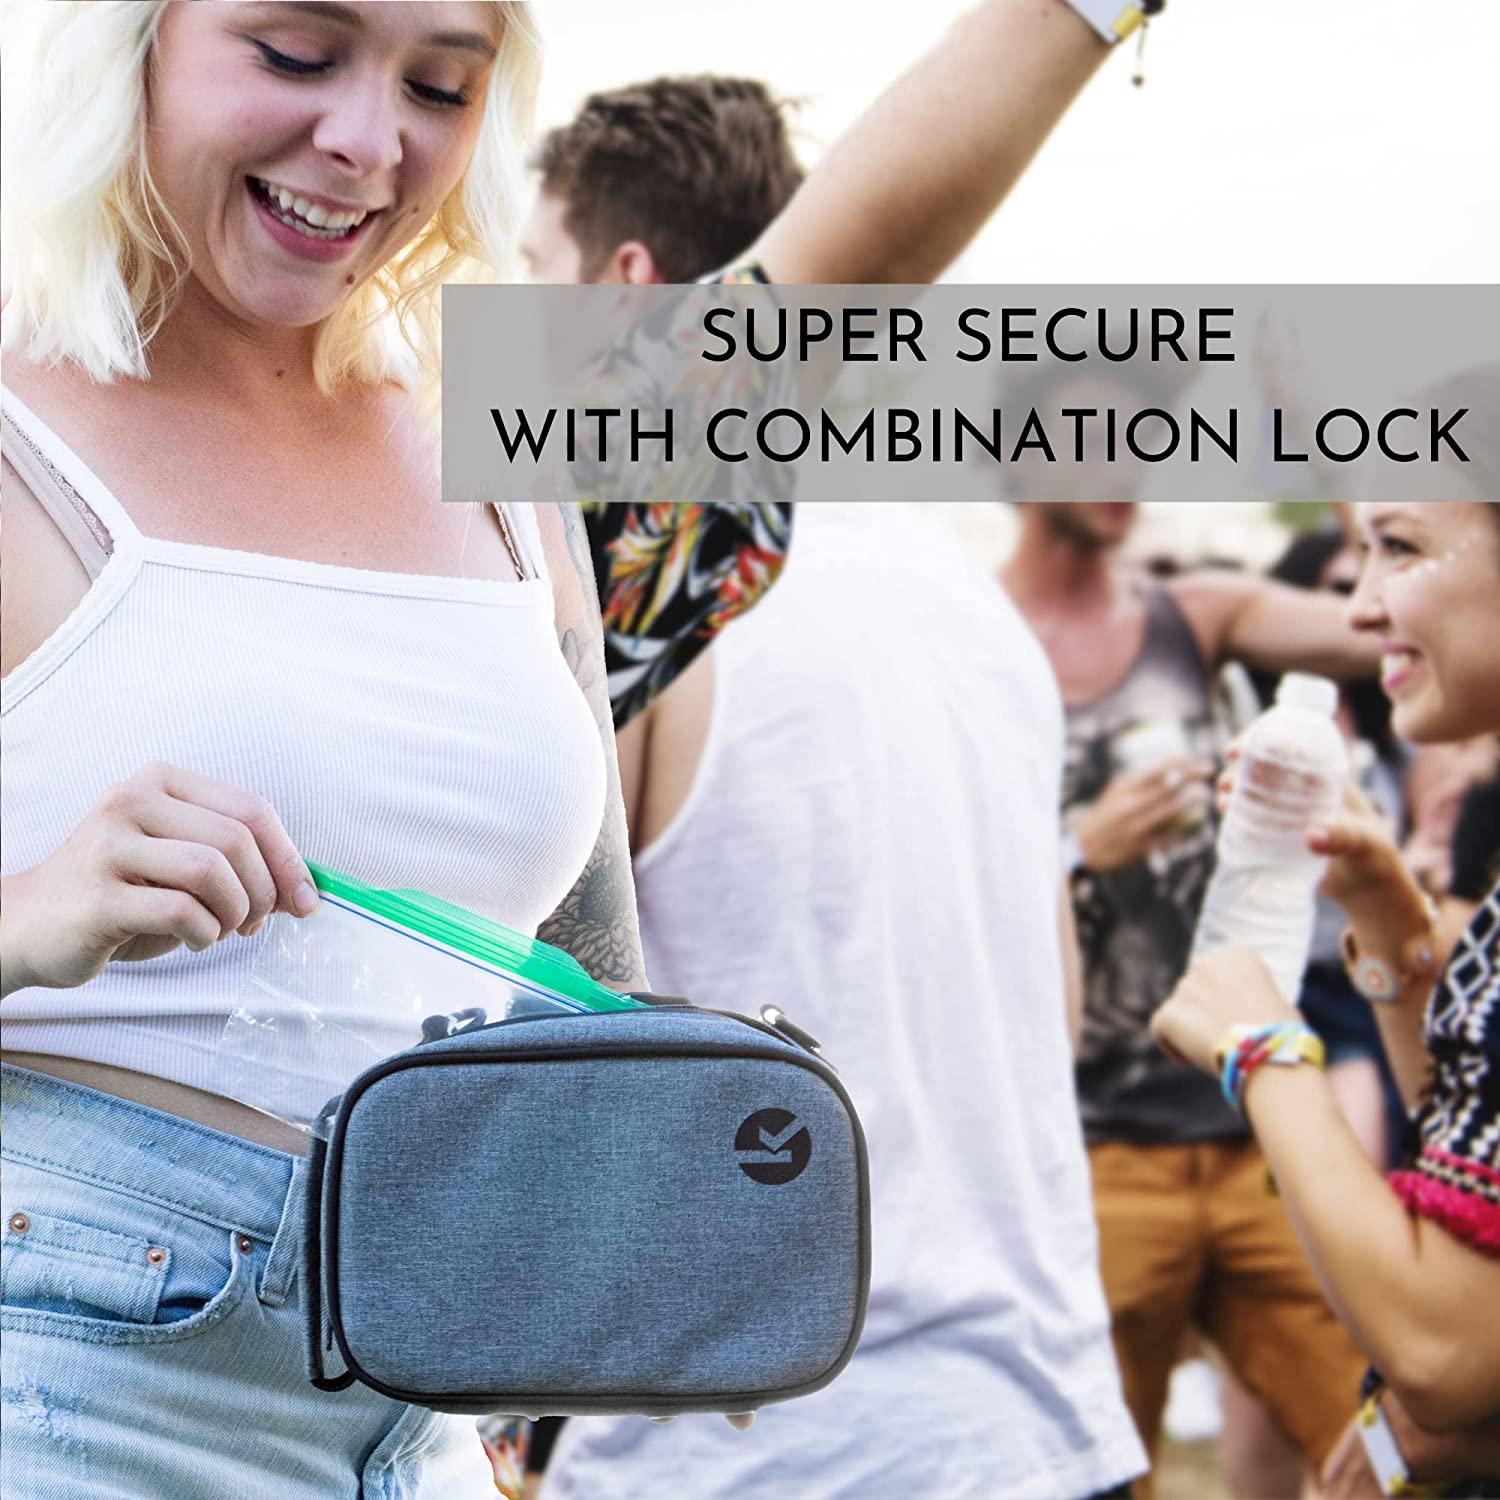 Discrete Smell Proof Odorless Bag with Easy Use Combination Lock - The  Perfect Stash Box, Medicine Container and Storage Case for Your Accessories  That Blocks Out Smells and Strong Odors